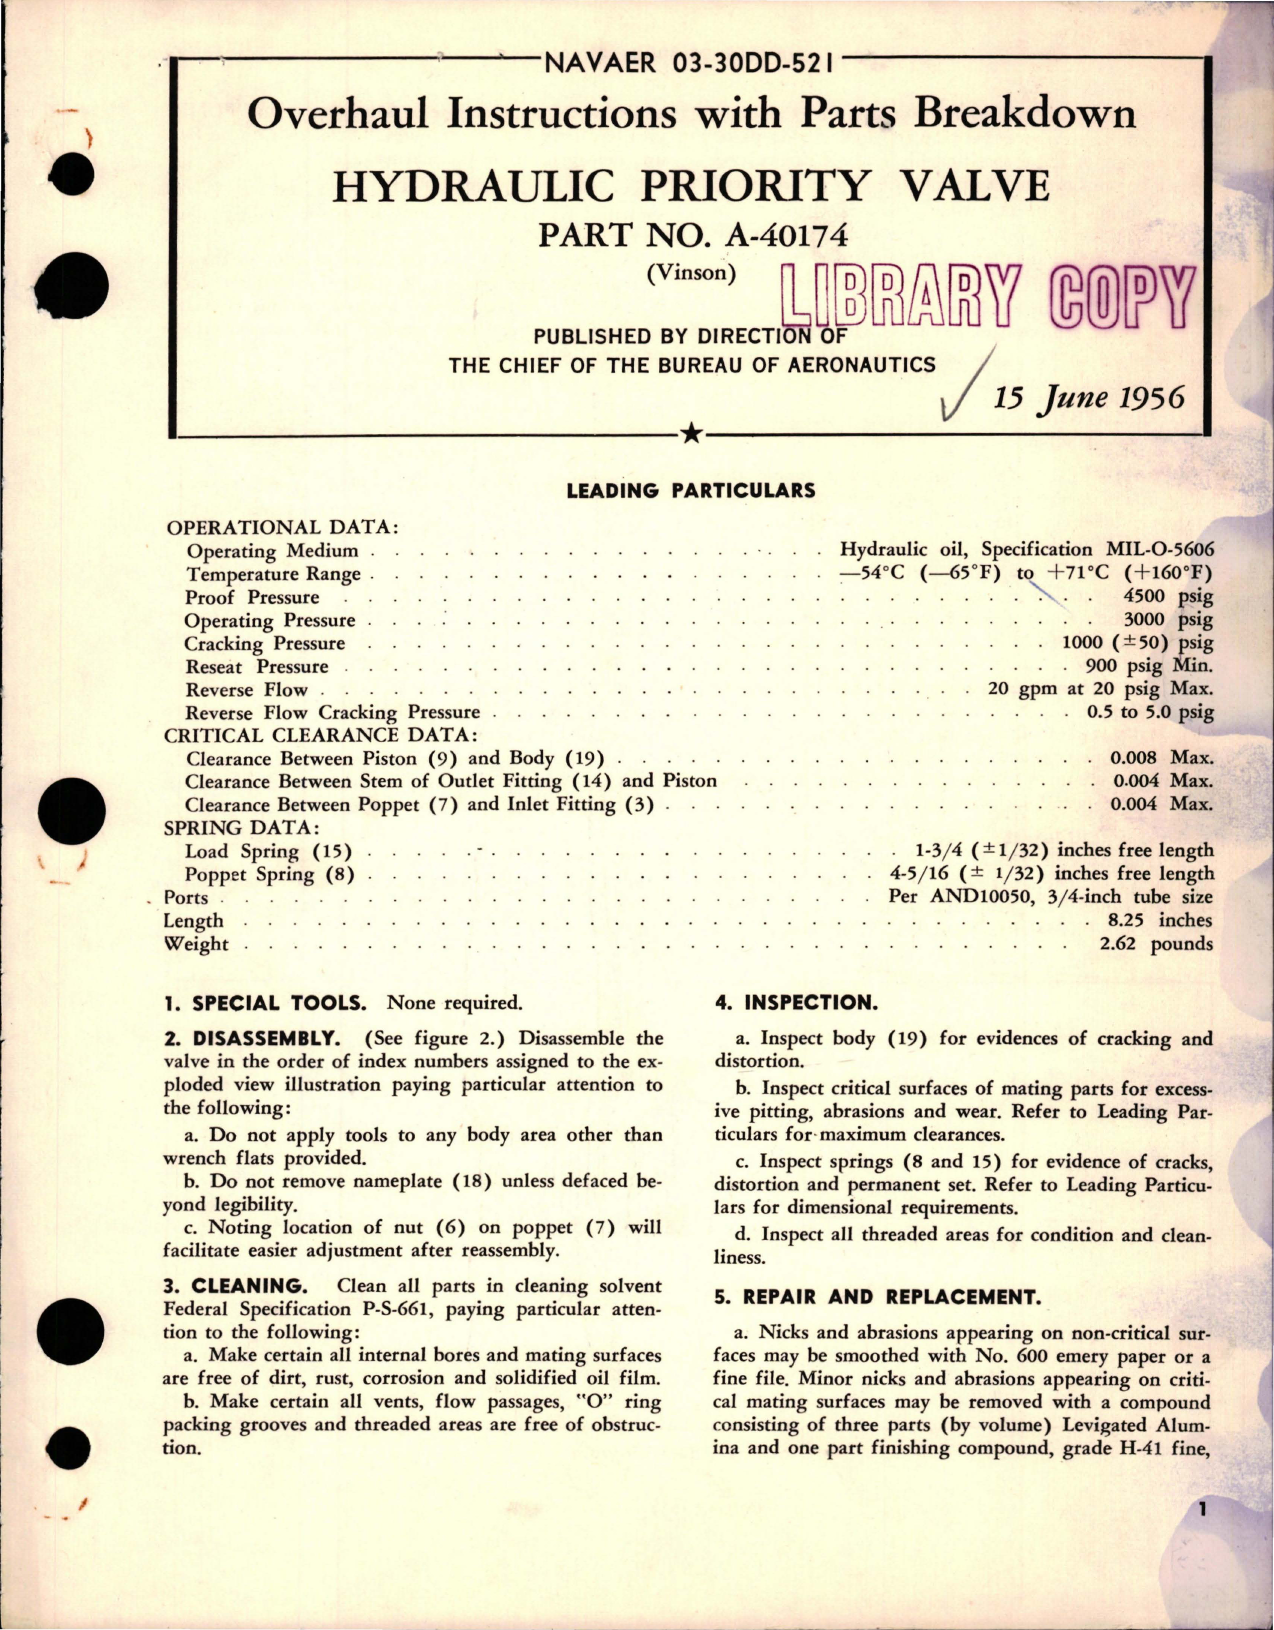 Sample page 1 from AirCorps Library document: Overhaul Instructions with Parts Breakdown for Hydraulic Priority Valve - Part A-40174